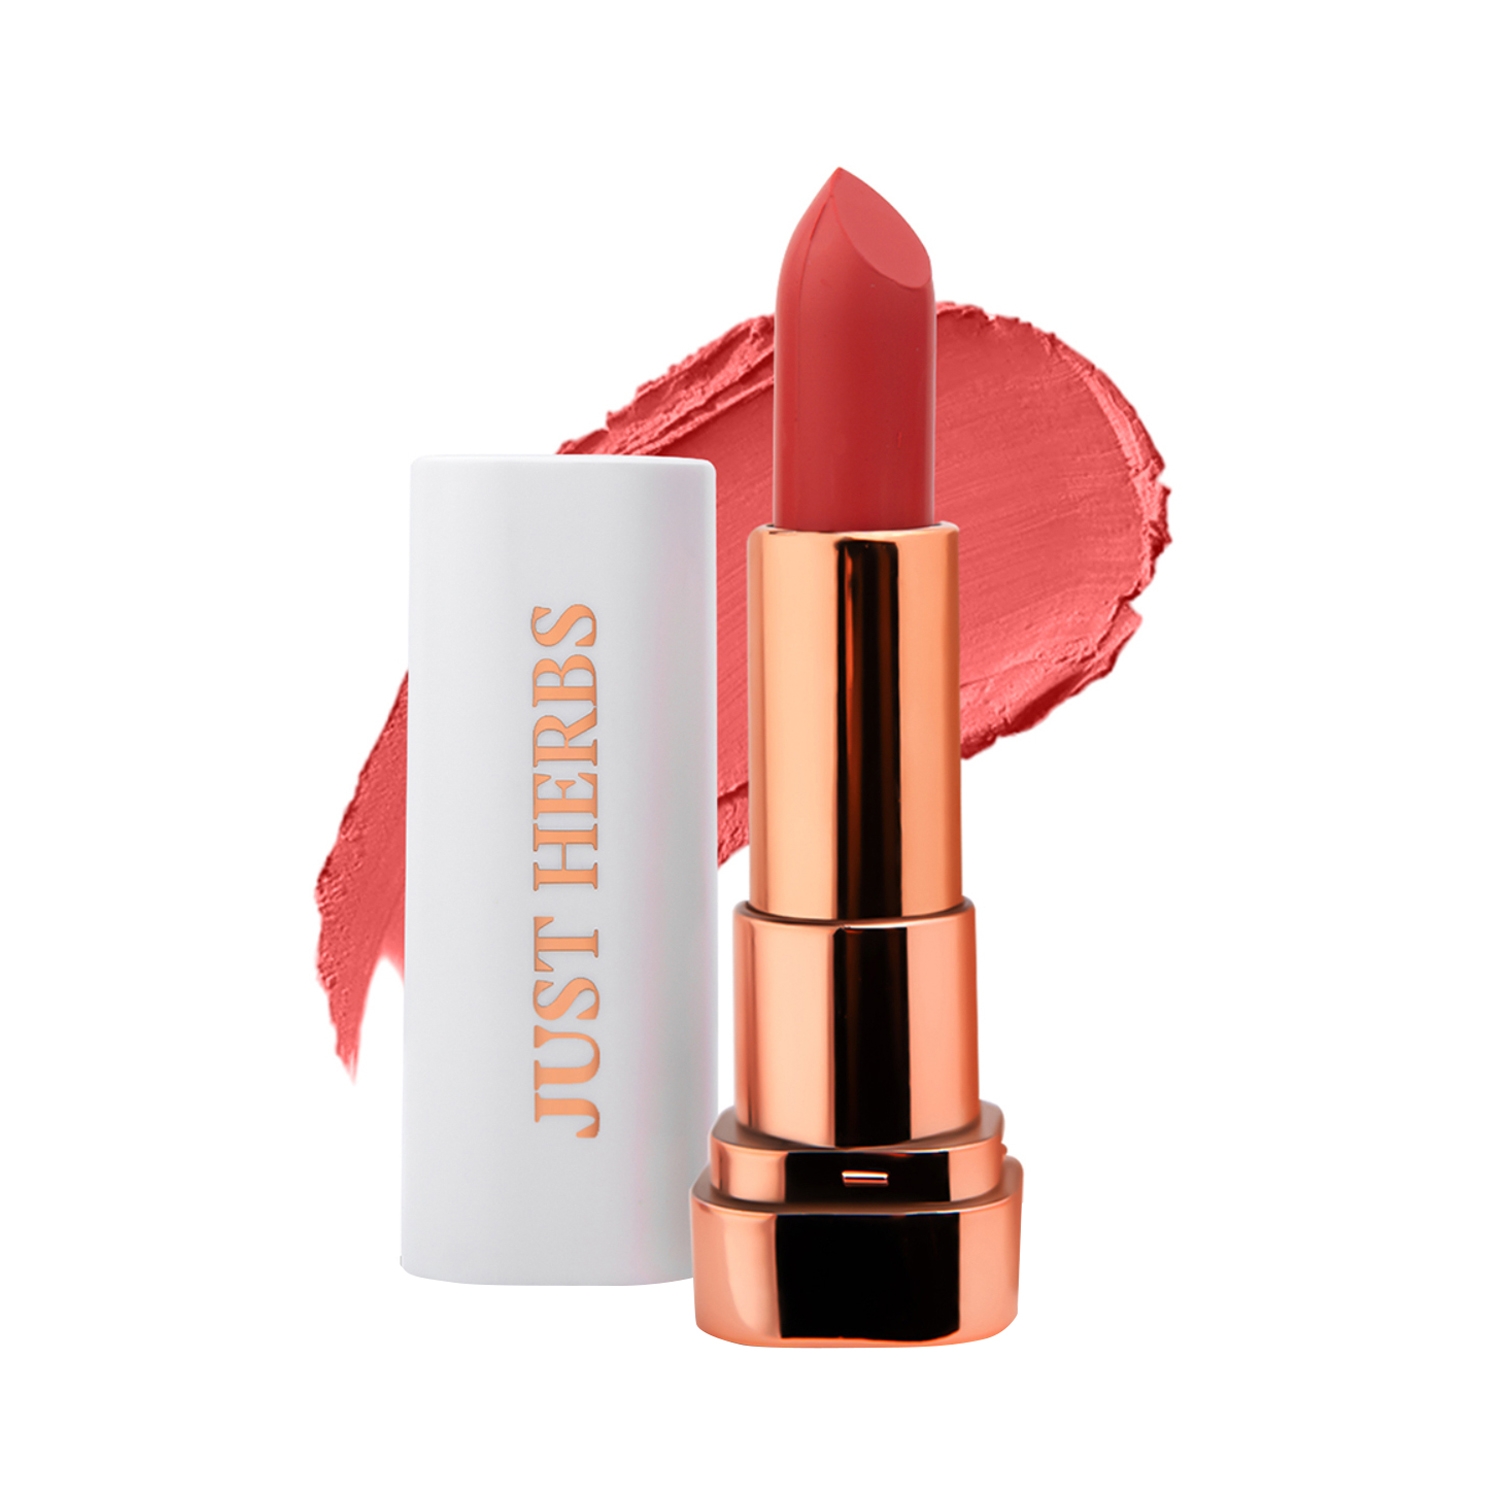 Just Herbs | Just Herbs Long Stay Relaxed Matte Lipstick Jhrm - 03 Juicy Peach (4.2g)